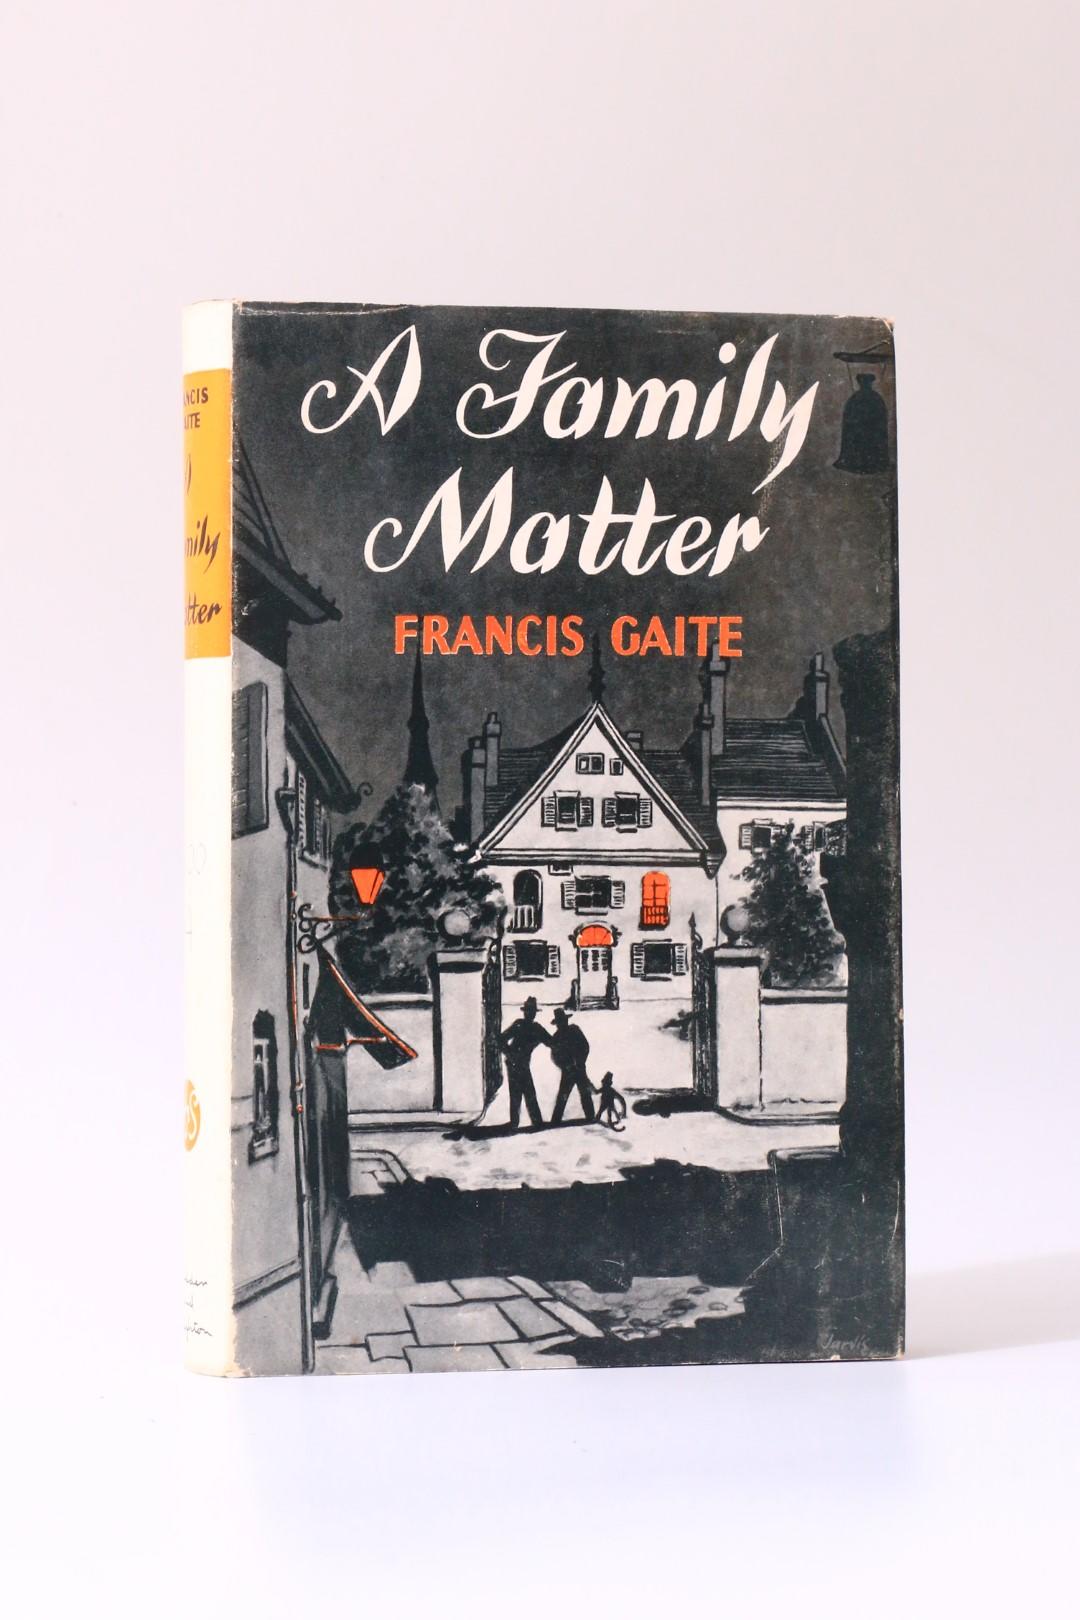 Francis Gaite [Adelaide Manning and Cyril Coles] - A Family Matter - Hodder & Stoughton, 1956, First Edition.